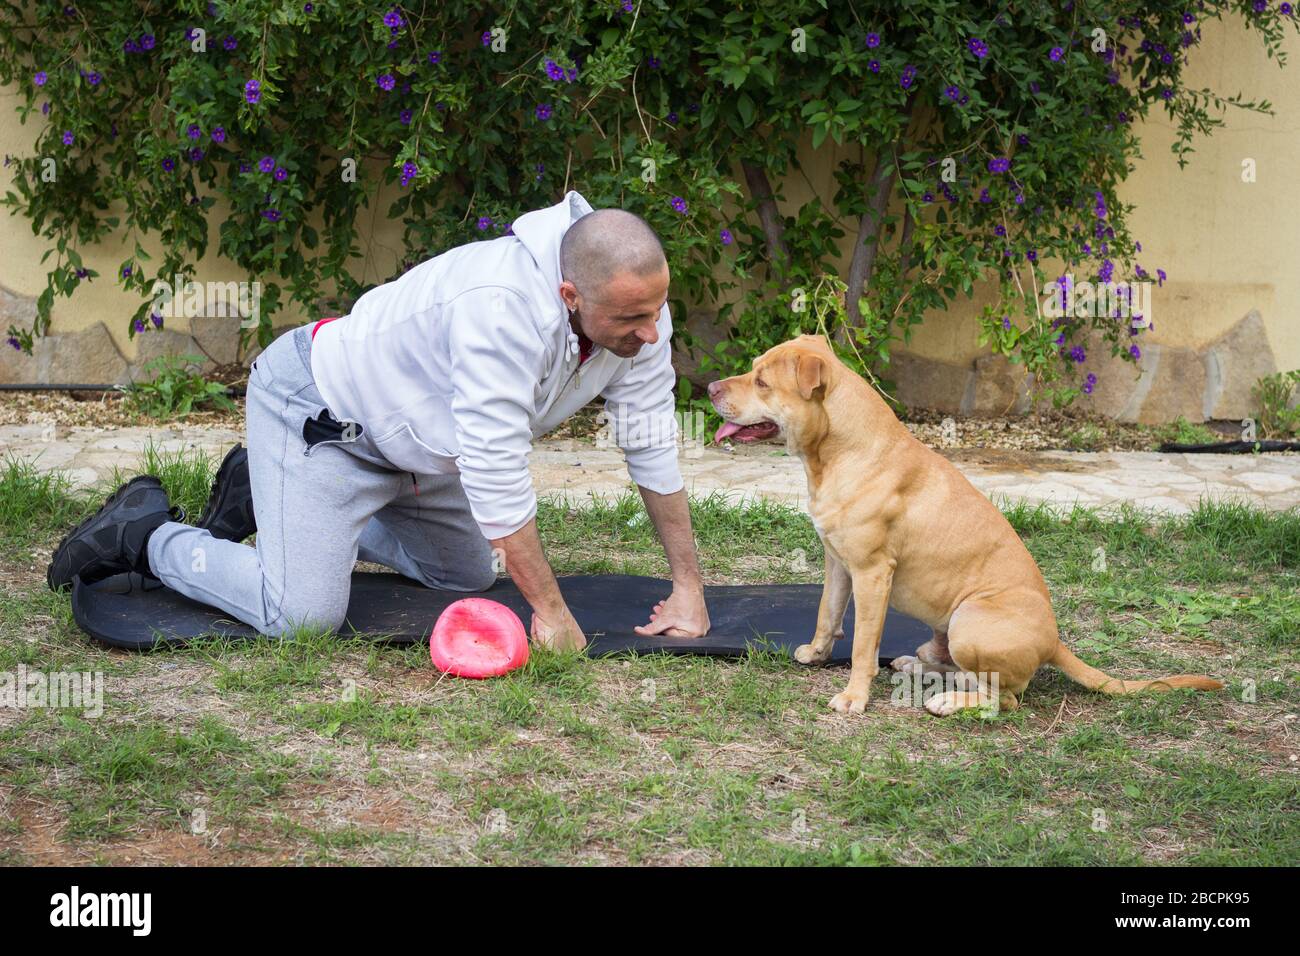 Man playing with dog outdoors in garden Stock Photo